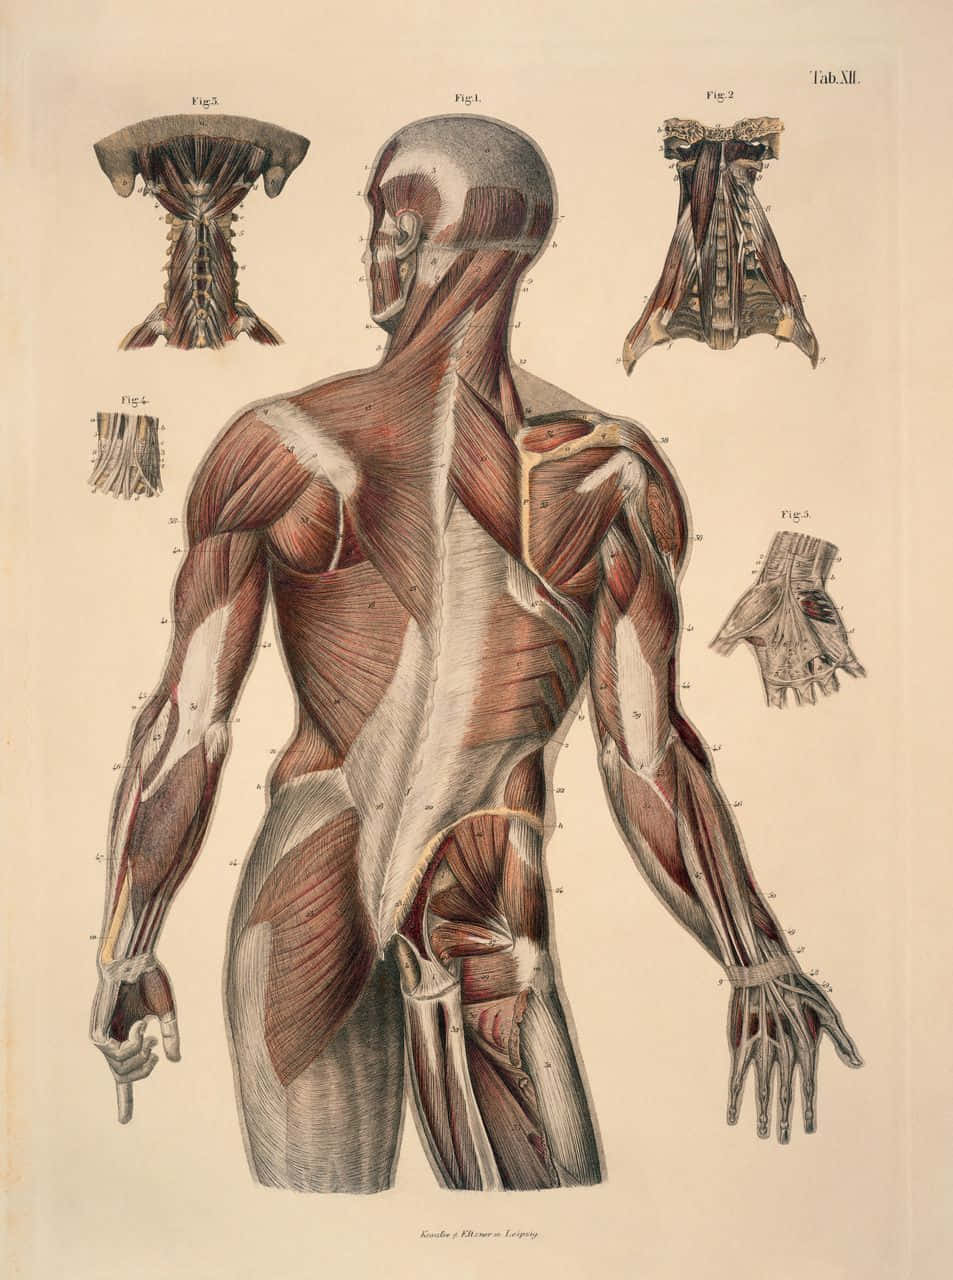 Explore the intricacy of the human body.